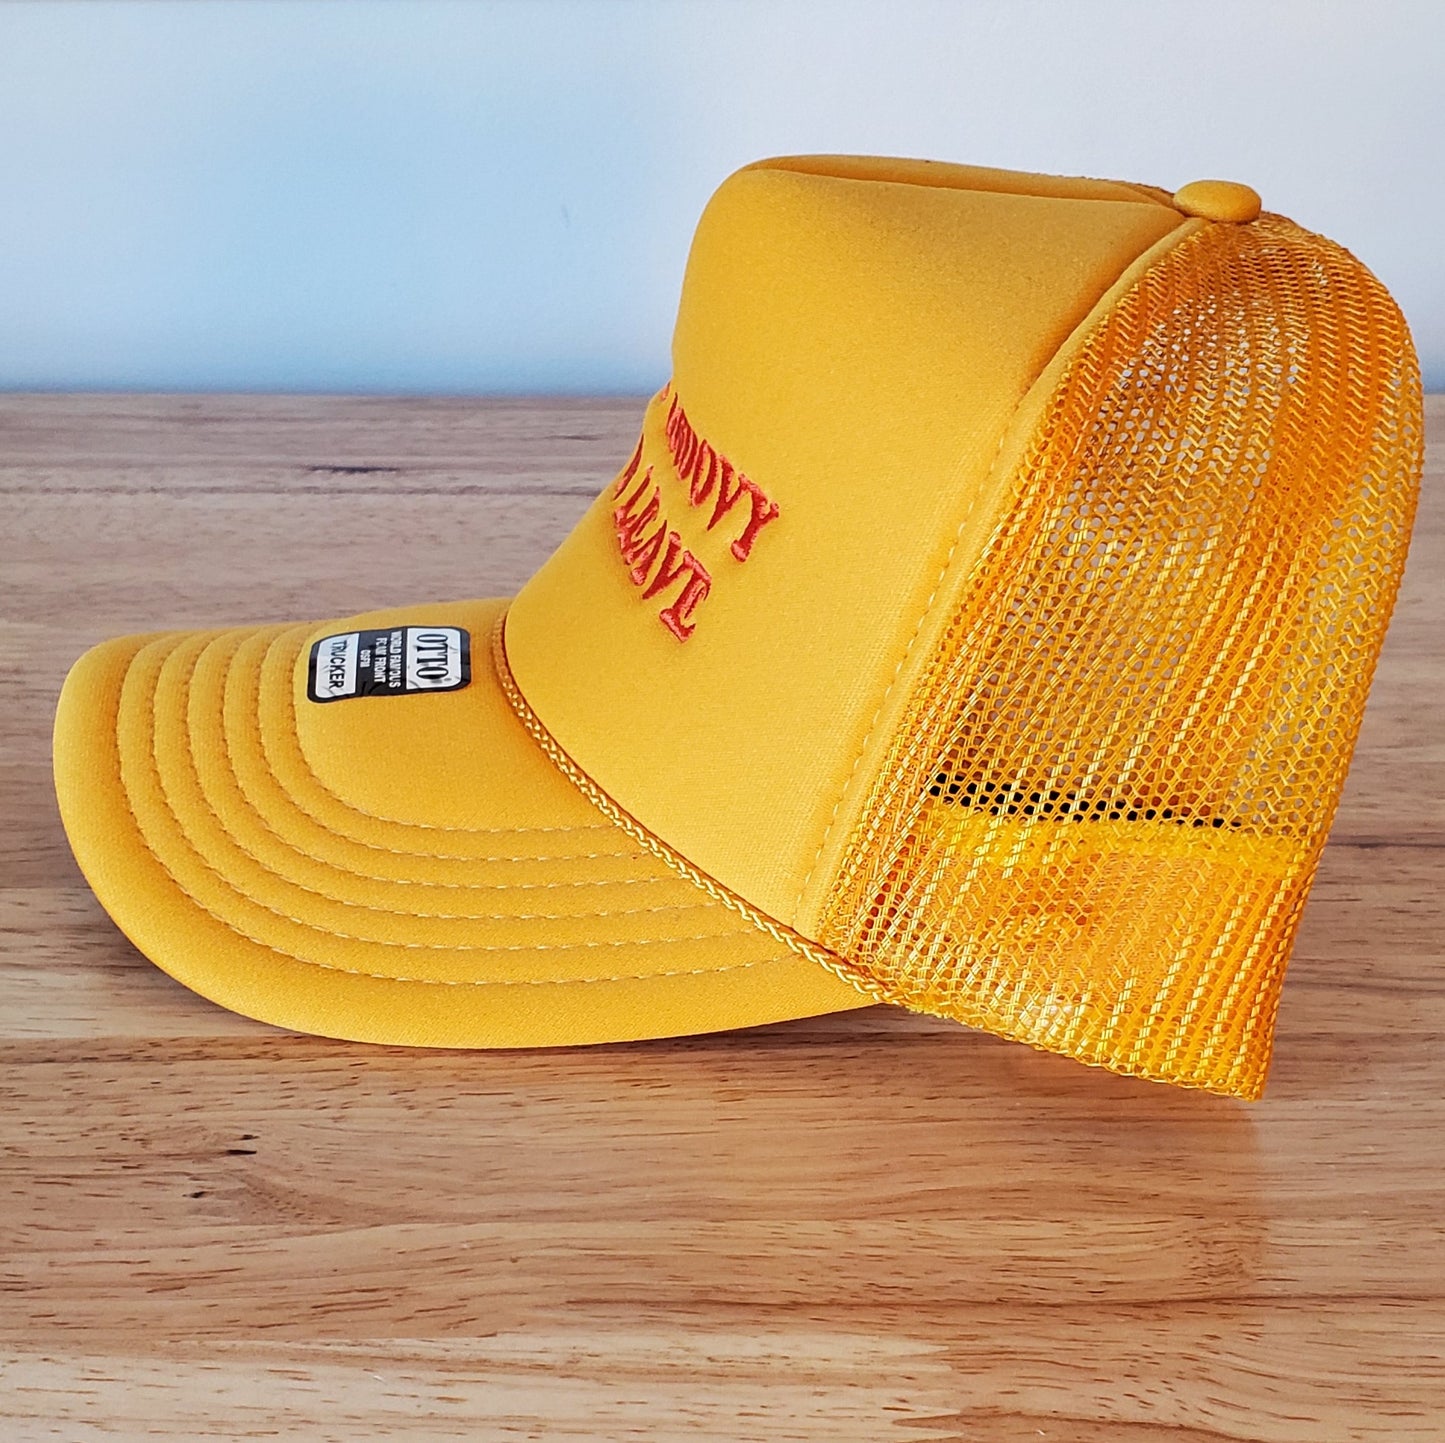 Be Groovy or Leave Trucker Hat